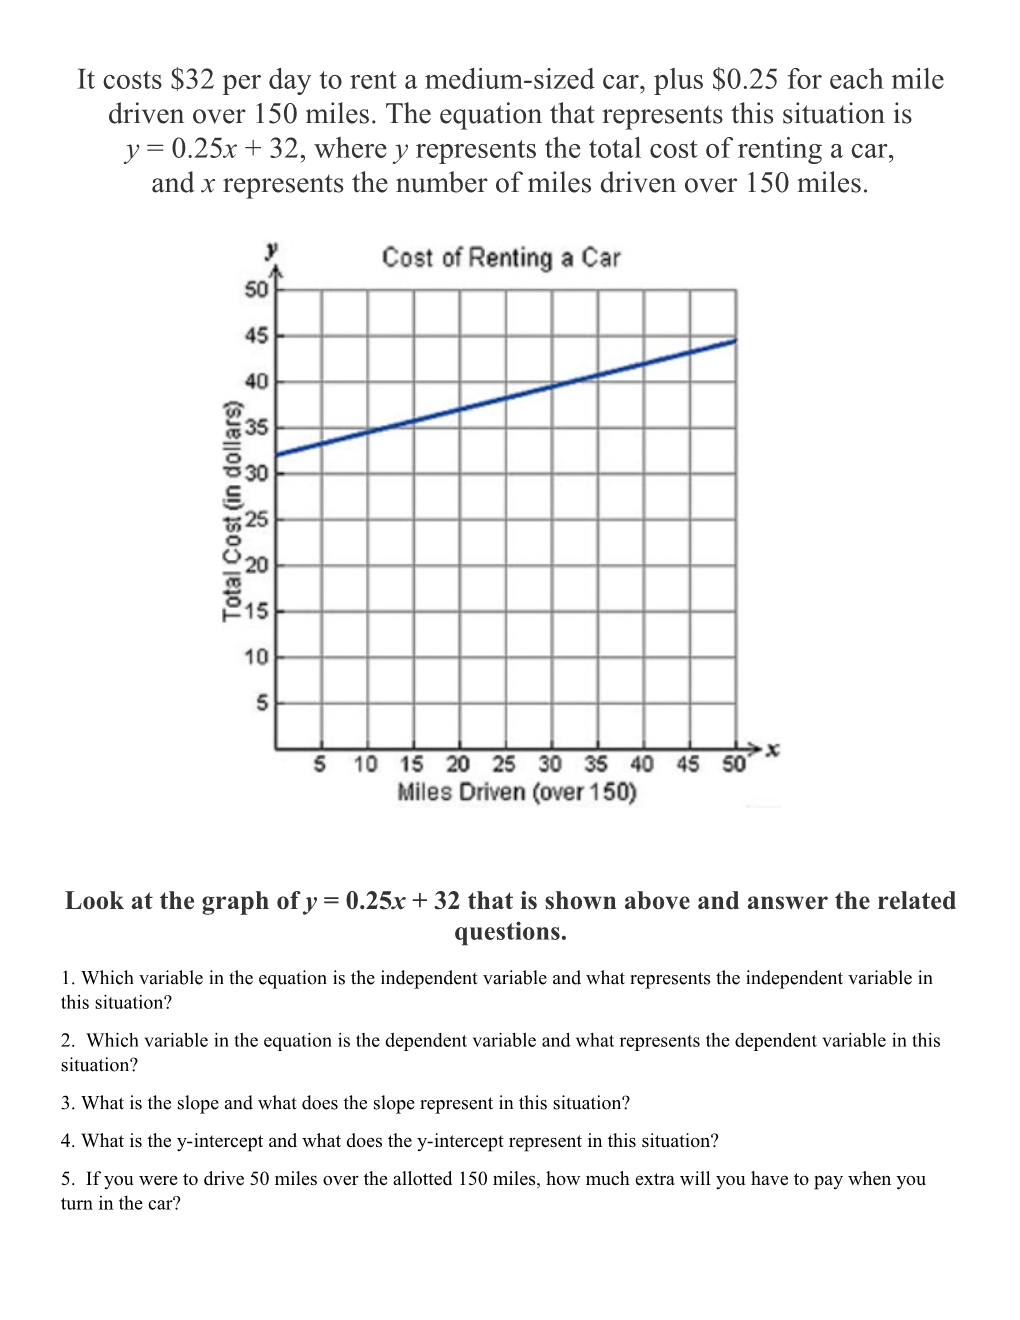 Look at the Graph Ofy= 0.25X+ 32 That Is Shown Above and Answer the Related Questions